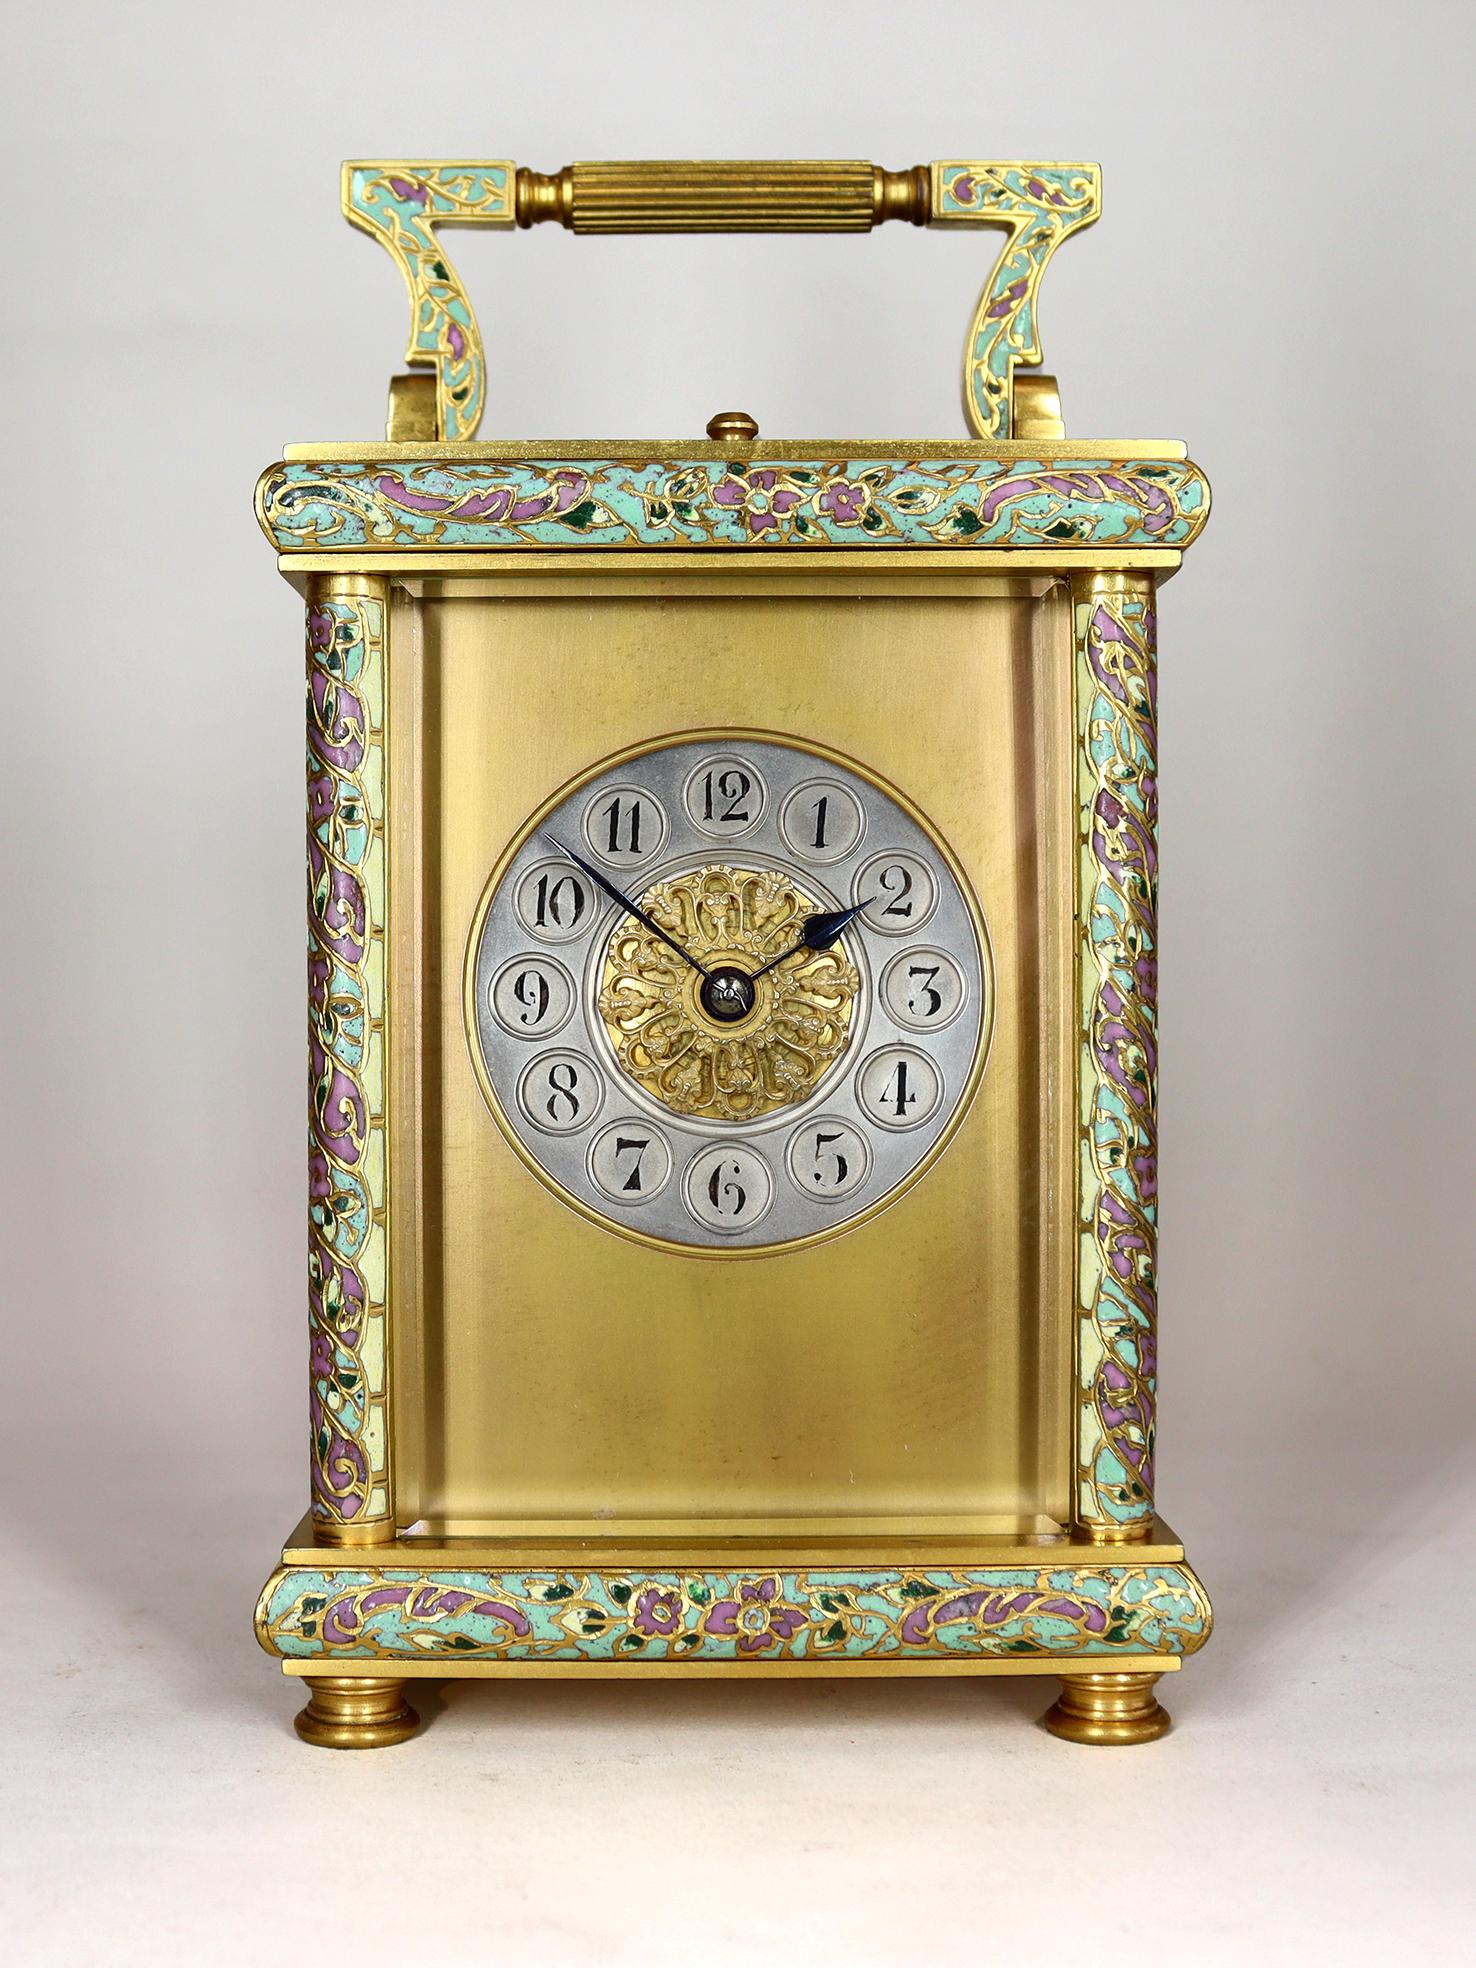 A charming repeating carriage clock in champleve enamel case by one of the great Parisian makers. This eight day two train movement with an English lever platform escapement striking on a blued steel gong with silvered Arabic dial and gilded mask is